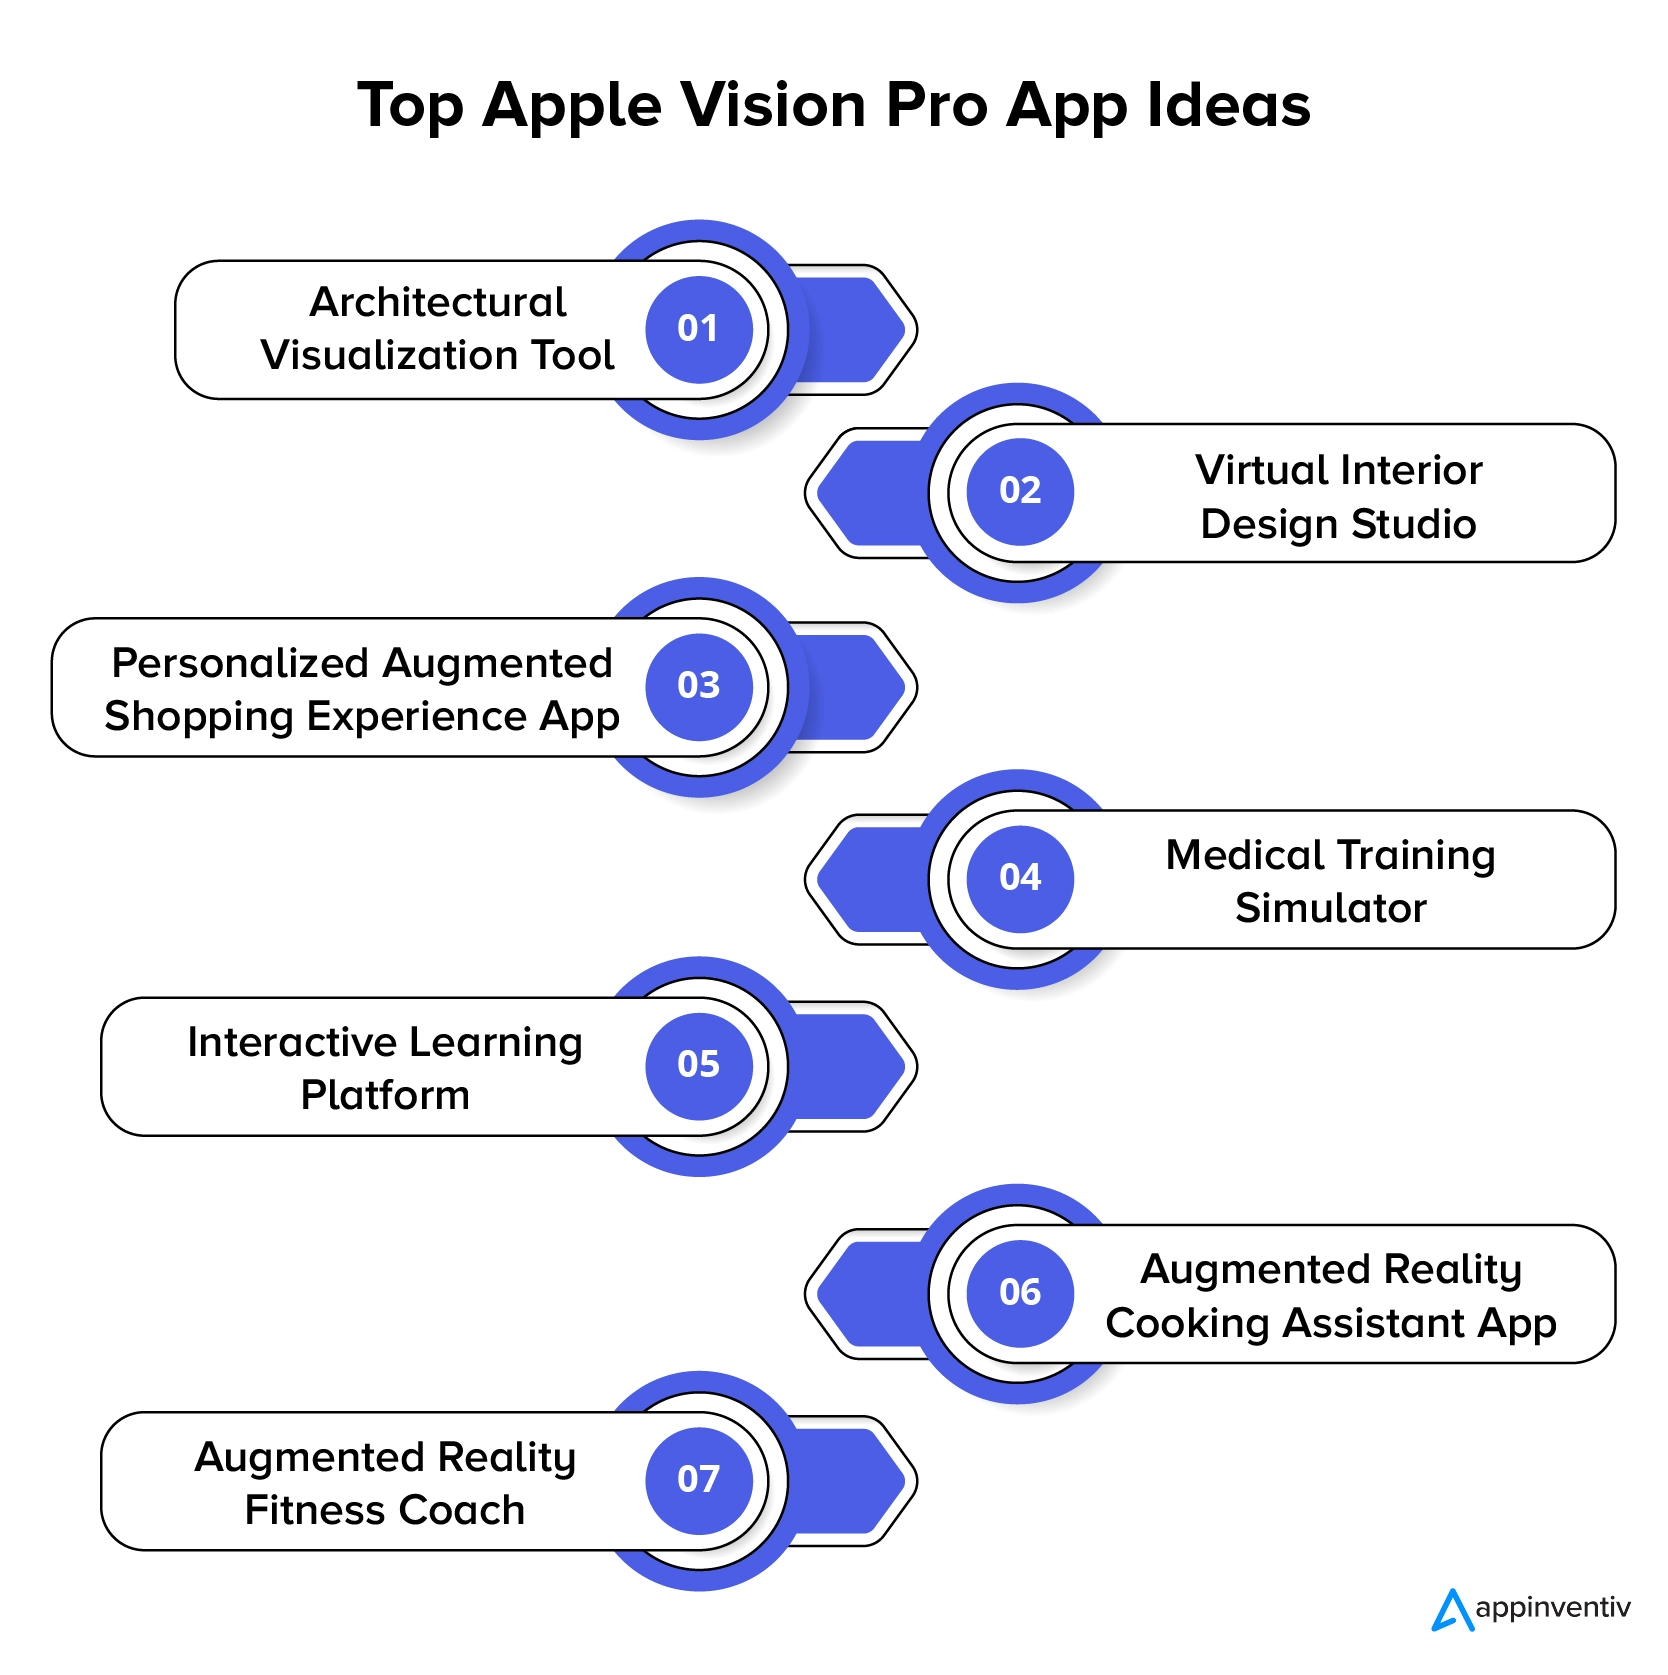 Craft Futuristic Experiences With the Top Apple Vision Pro App Ideas